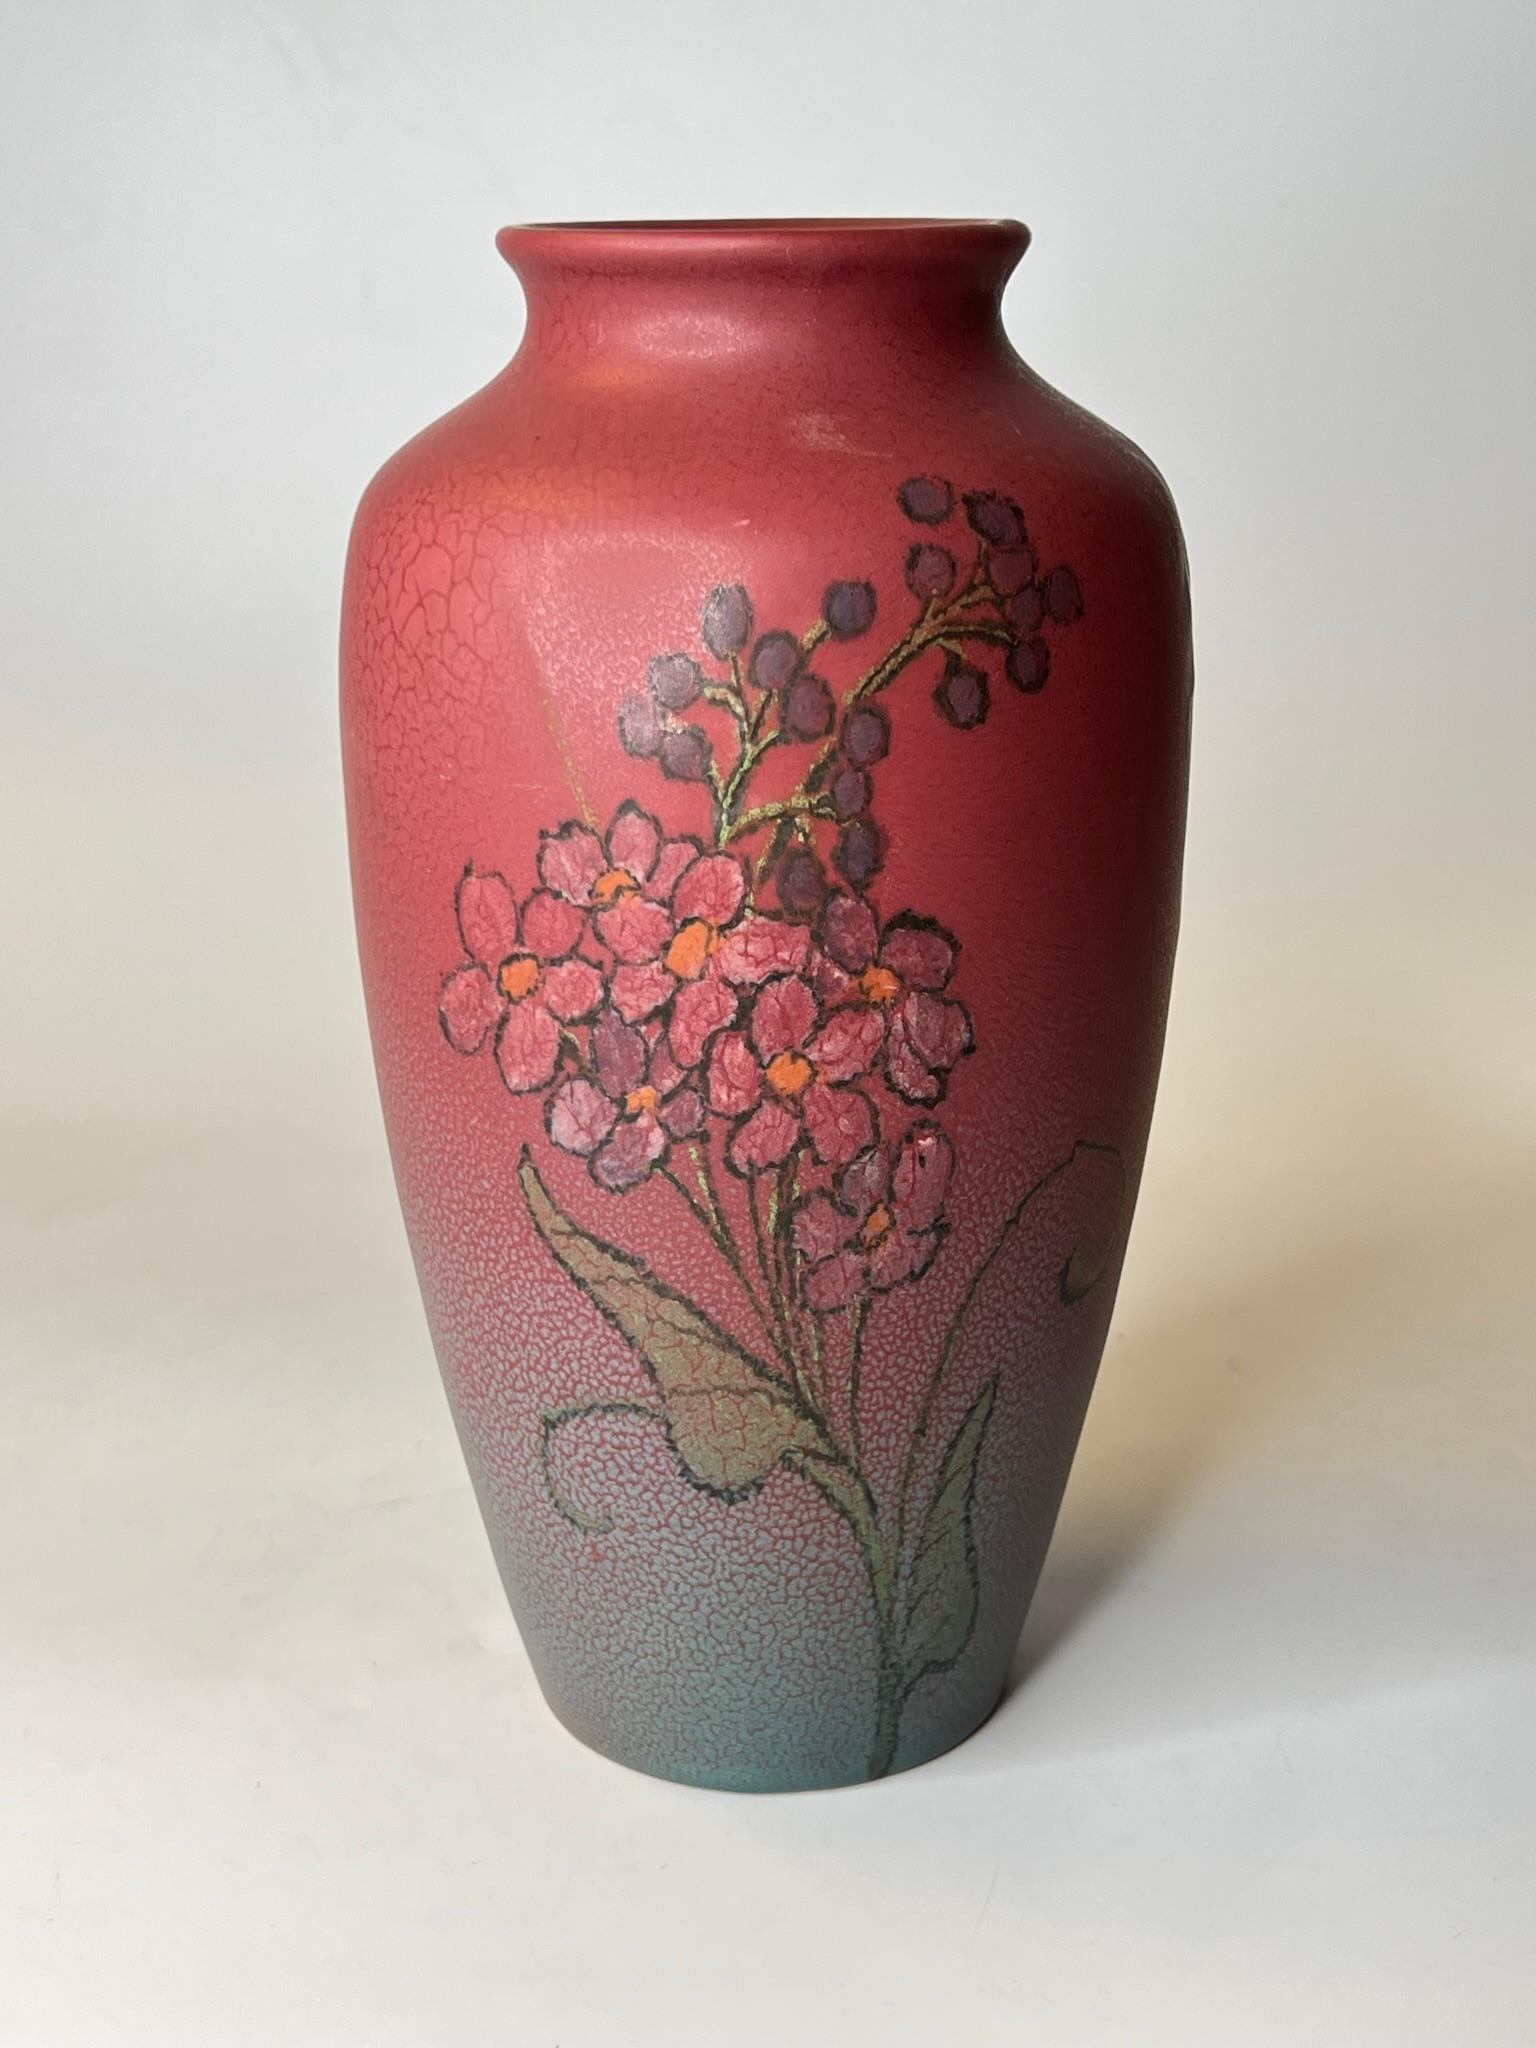 Our Rookwood vase, dated 1922, was designed by Margaret Helen McDonald (1913-1948) and is signed with her monogram.

The artist was the daughter of the famous Rookwood artist, William McDonald. She joined her father at the firm to decorate objects